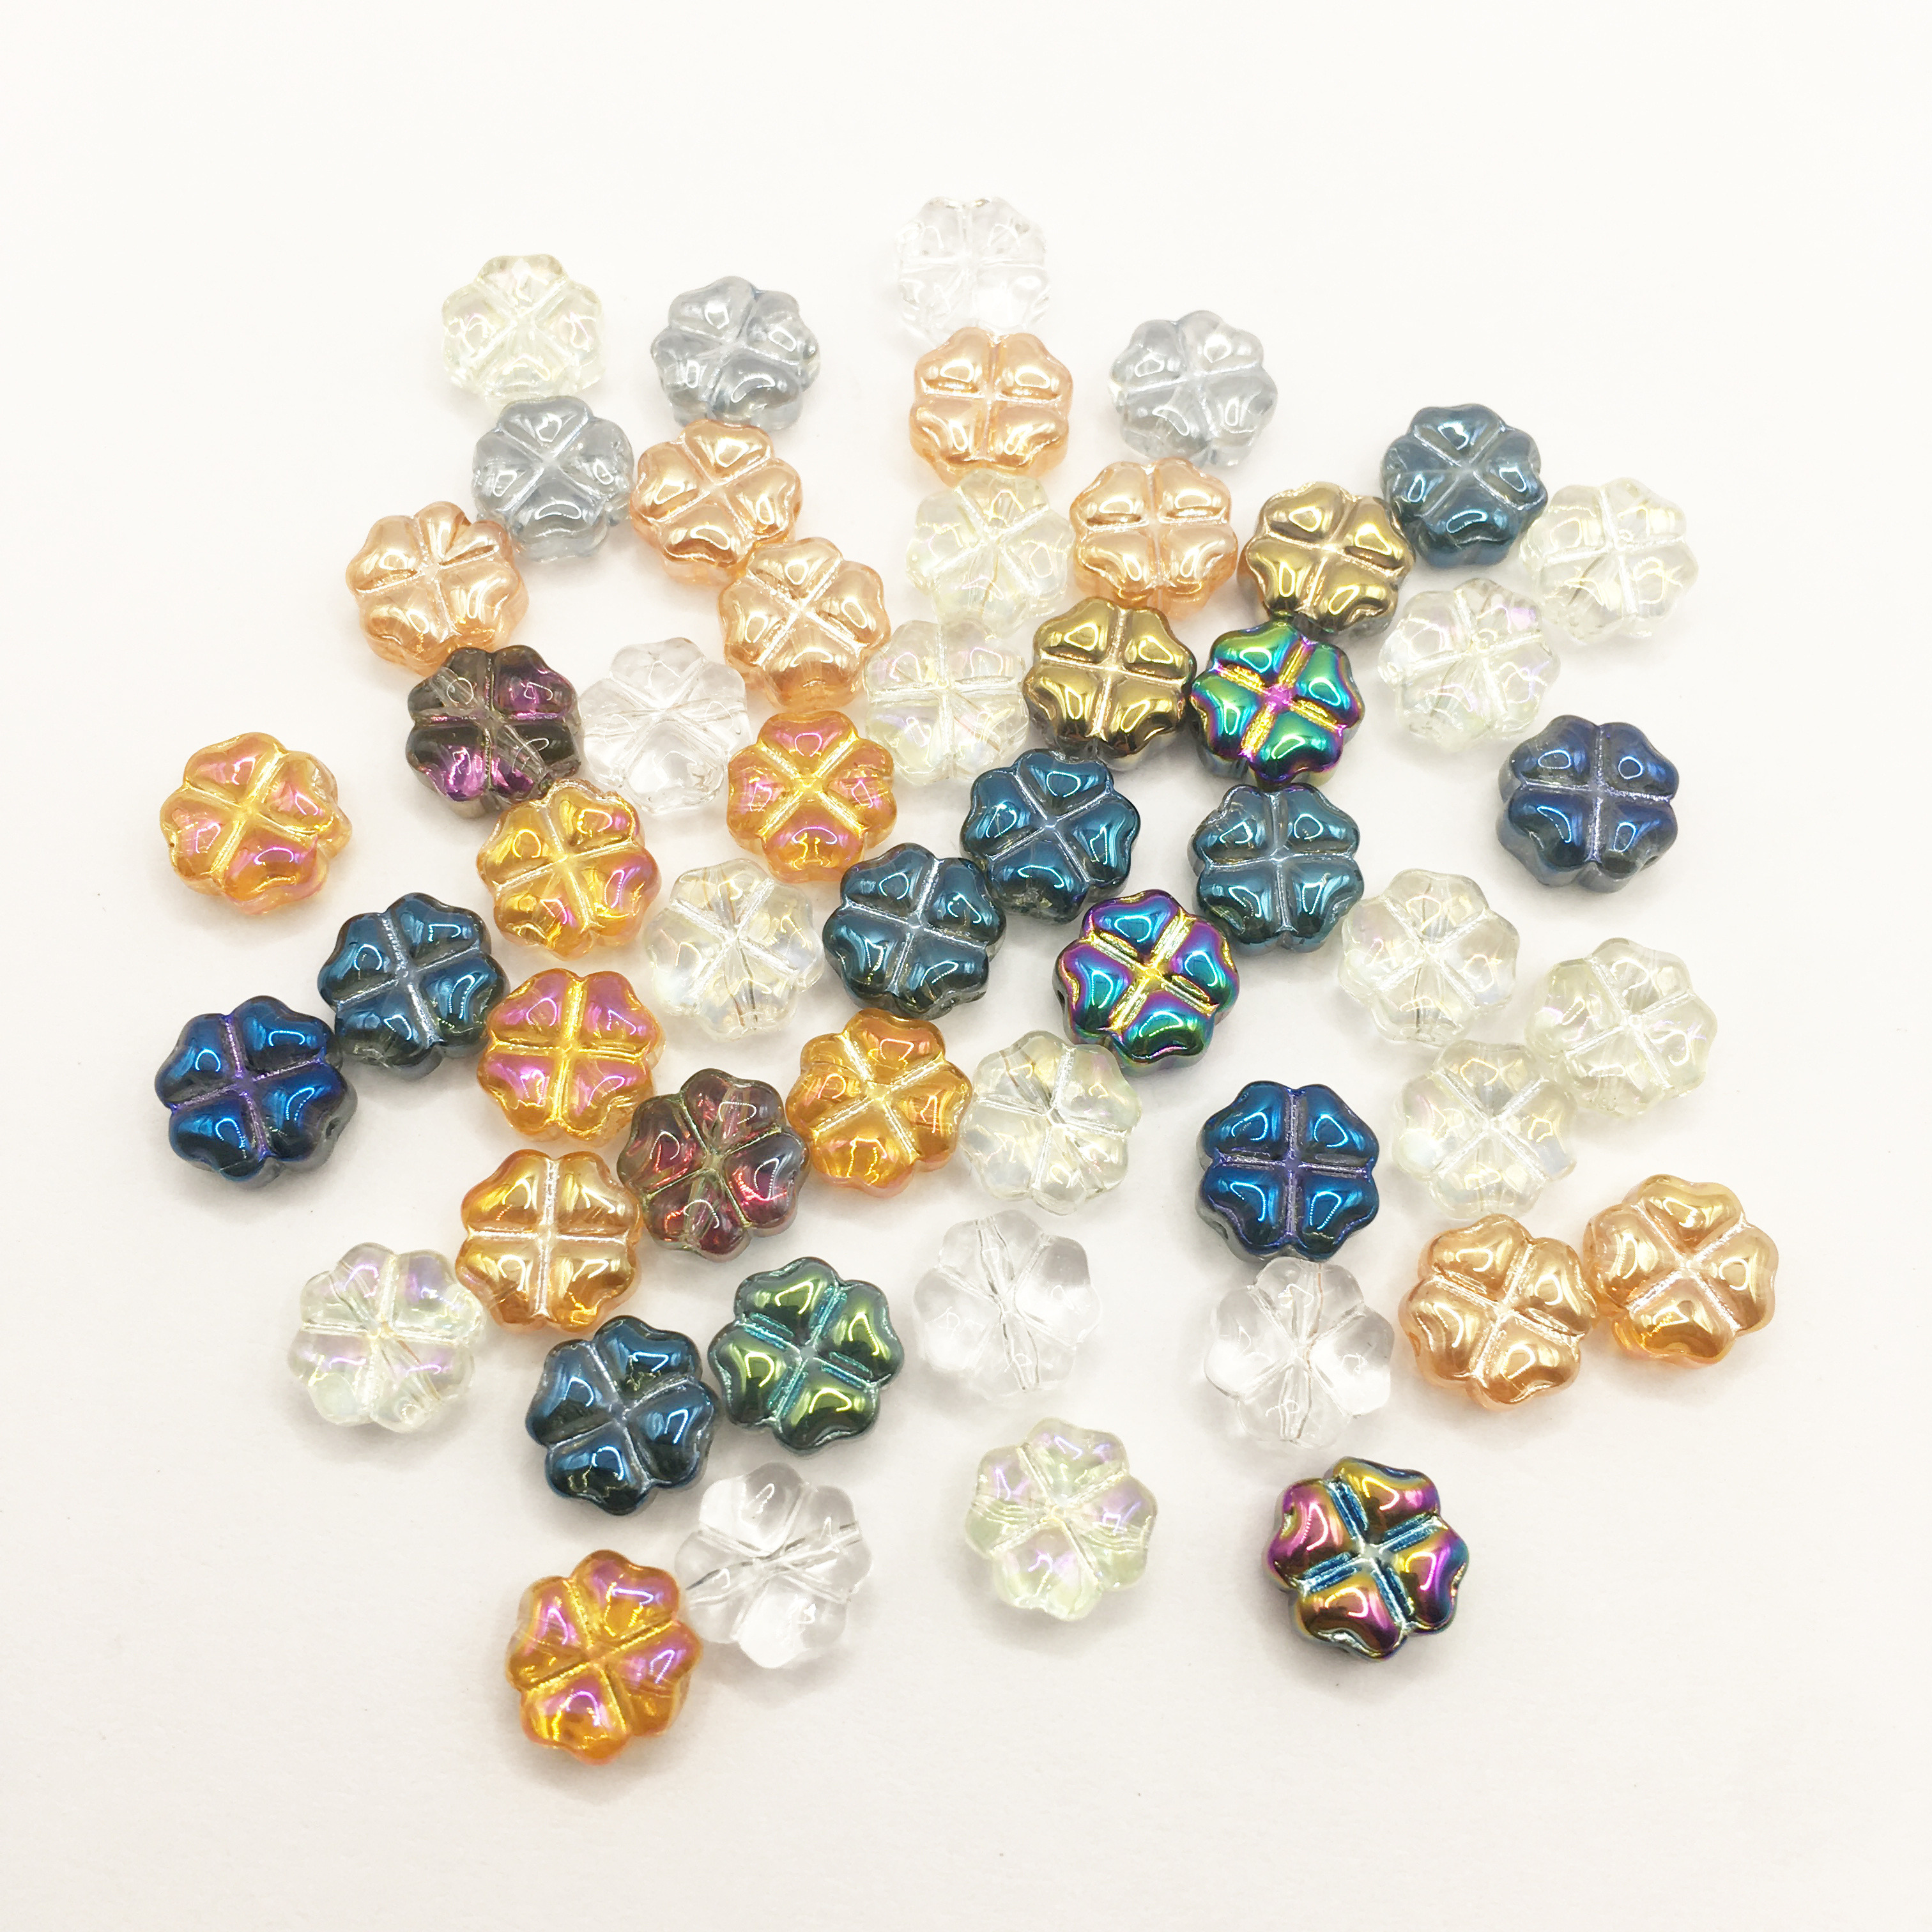 30Pcs Colorful Large Hole Copper Beads Glass Rhinestones Sun Flower Set  Beads For Jewelry Making Perfect DIY Bracelet Necklace Handmade Craft  Supplies